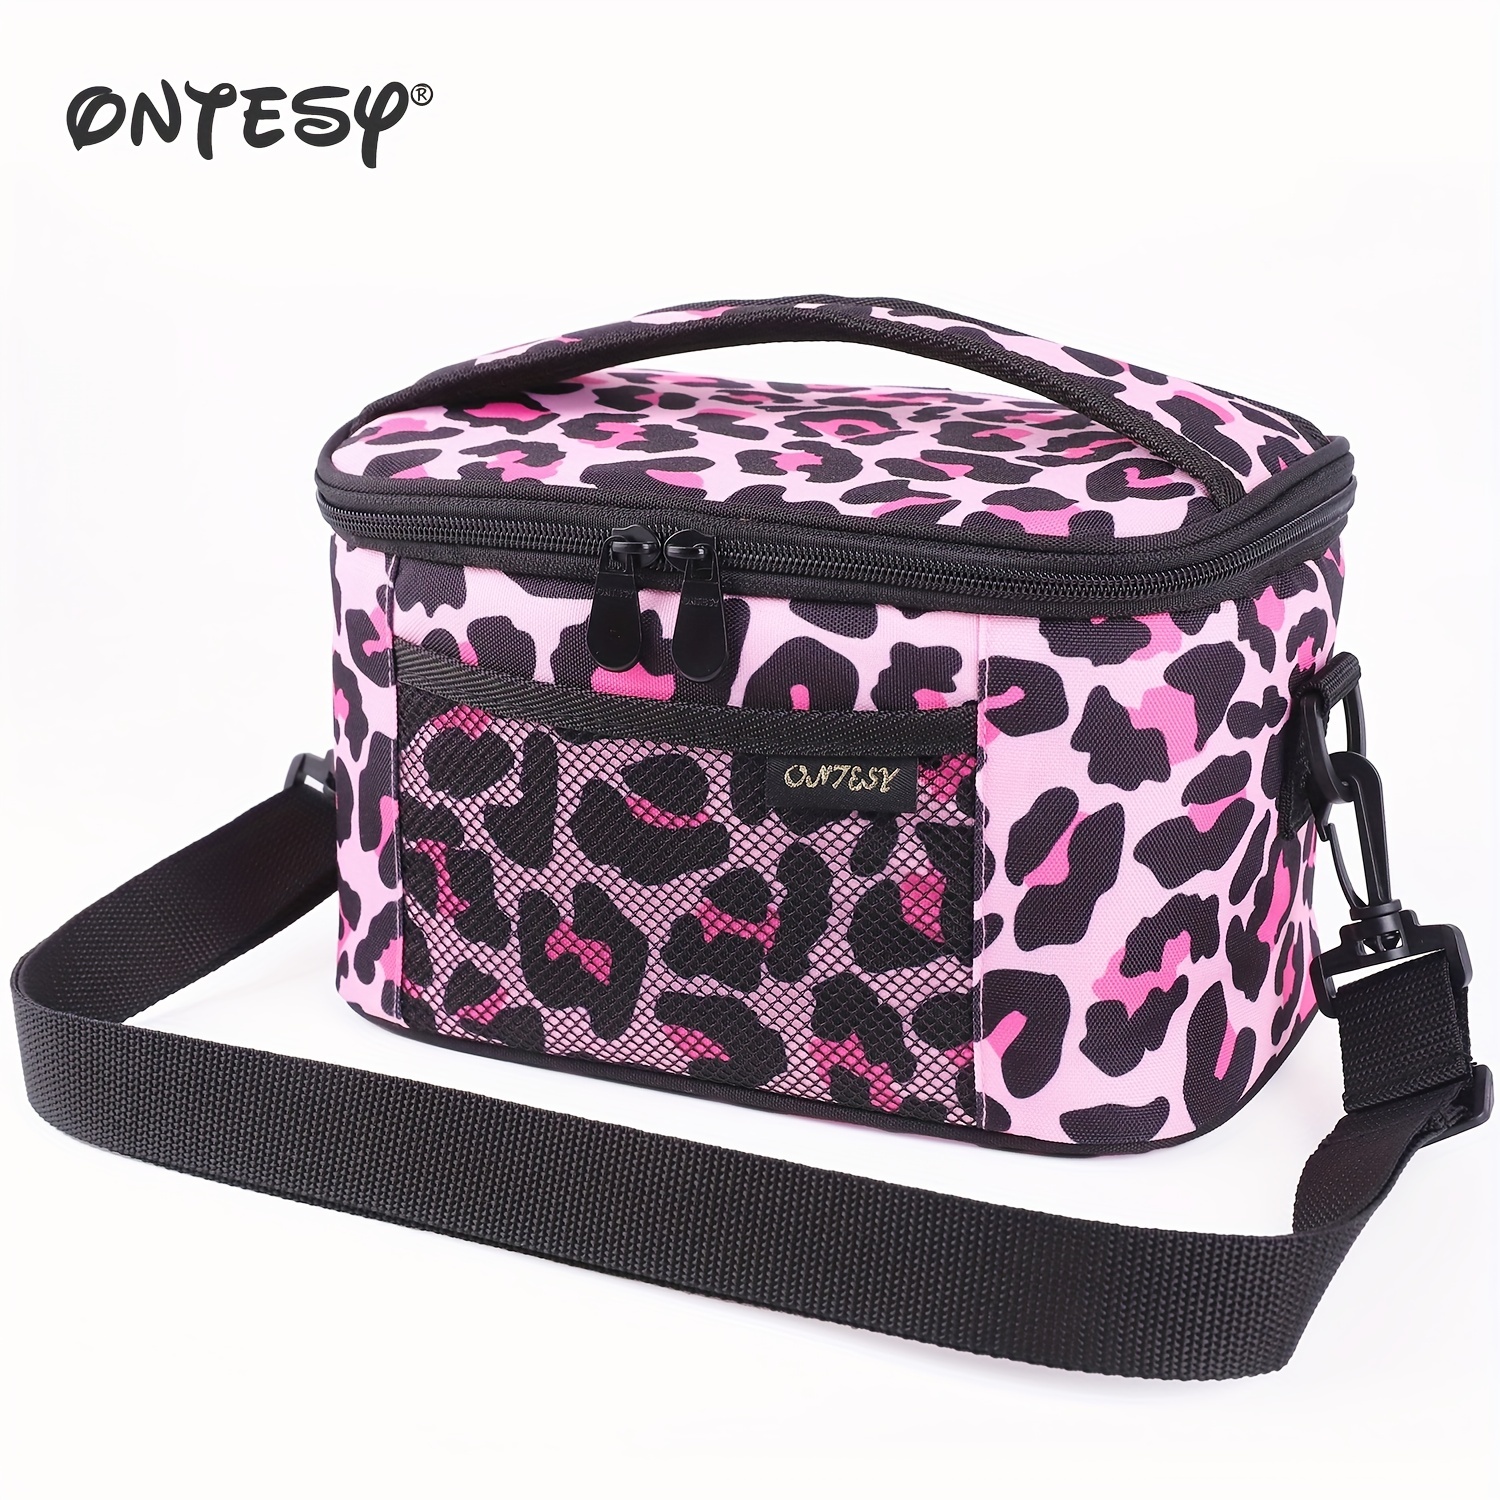 https://img.kwcdn.com/product/with-removable-shoulder-strap/d69d2f15w98k18-3273dabe/Fancyalgo/VirtualModelMatting/dc0780bf5a2a801445eacefdc76a8dff.jpg